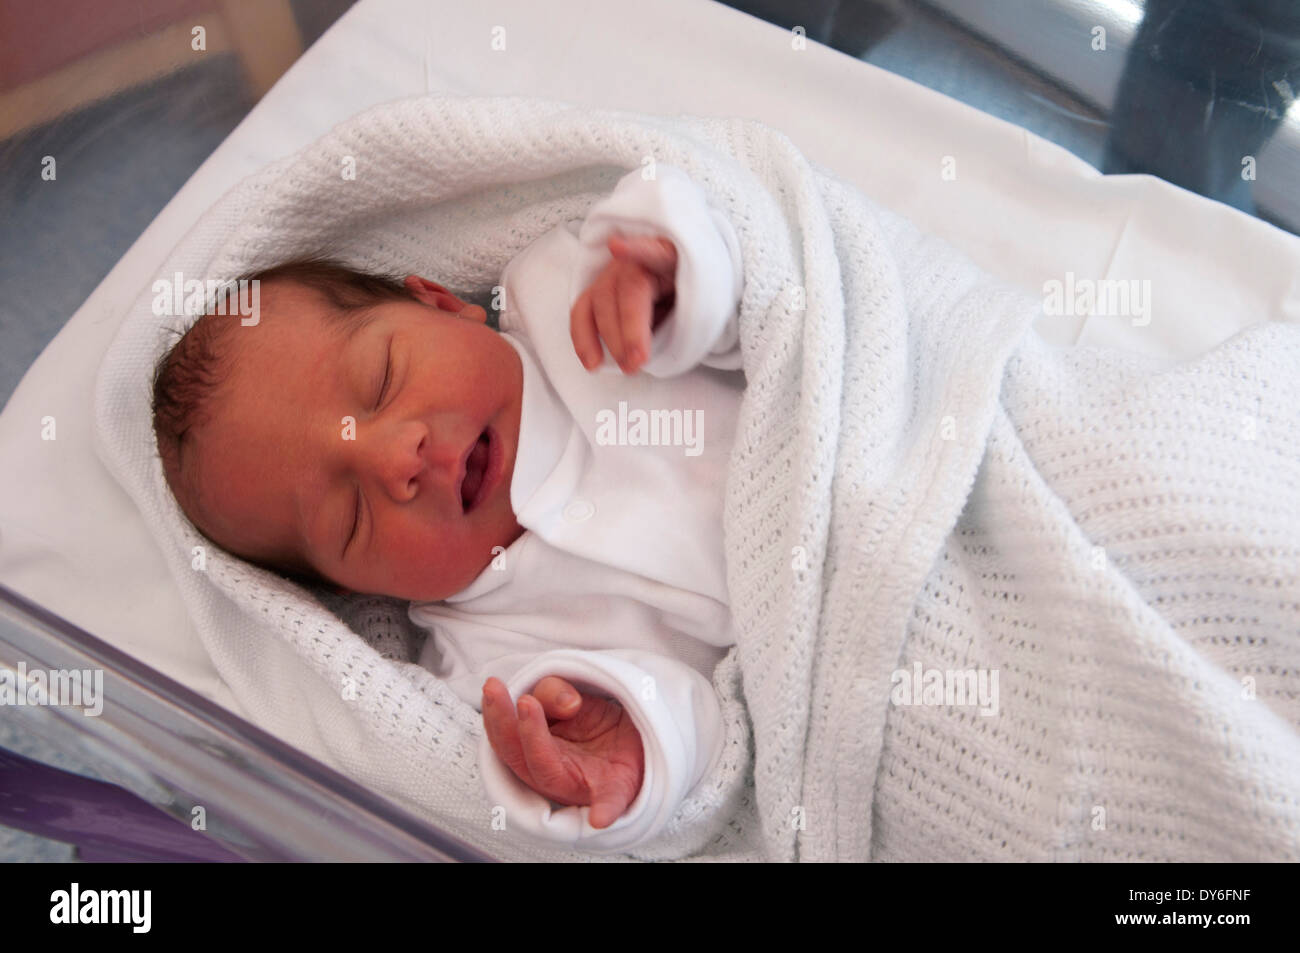 Newborn baby girl a few hours old asleep in hospital cot Stock Photo